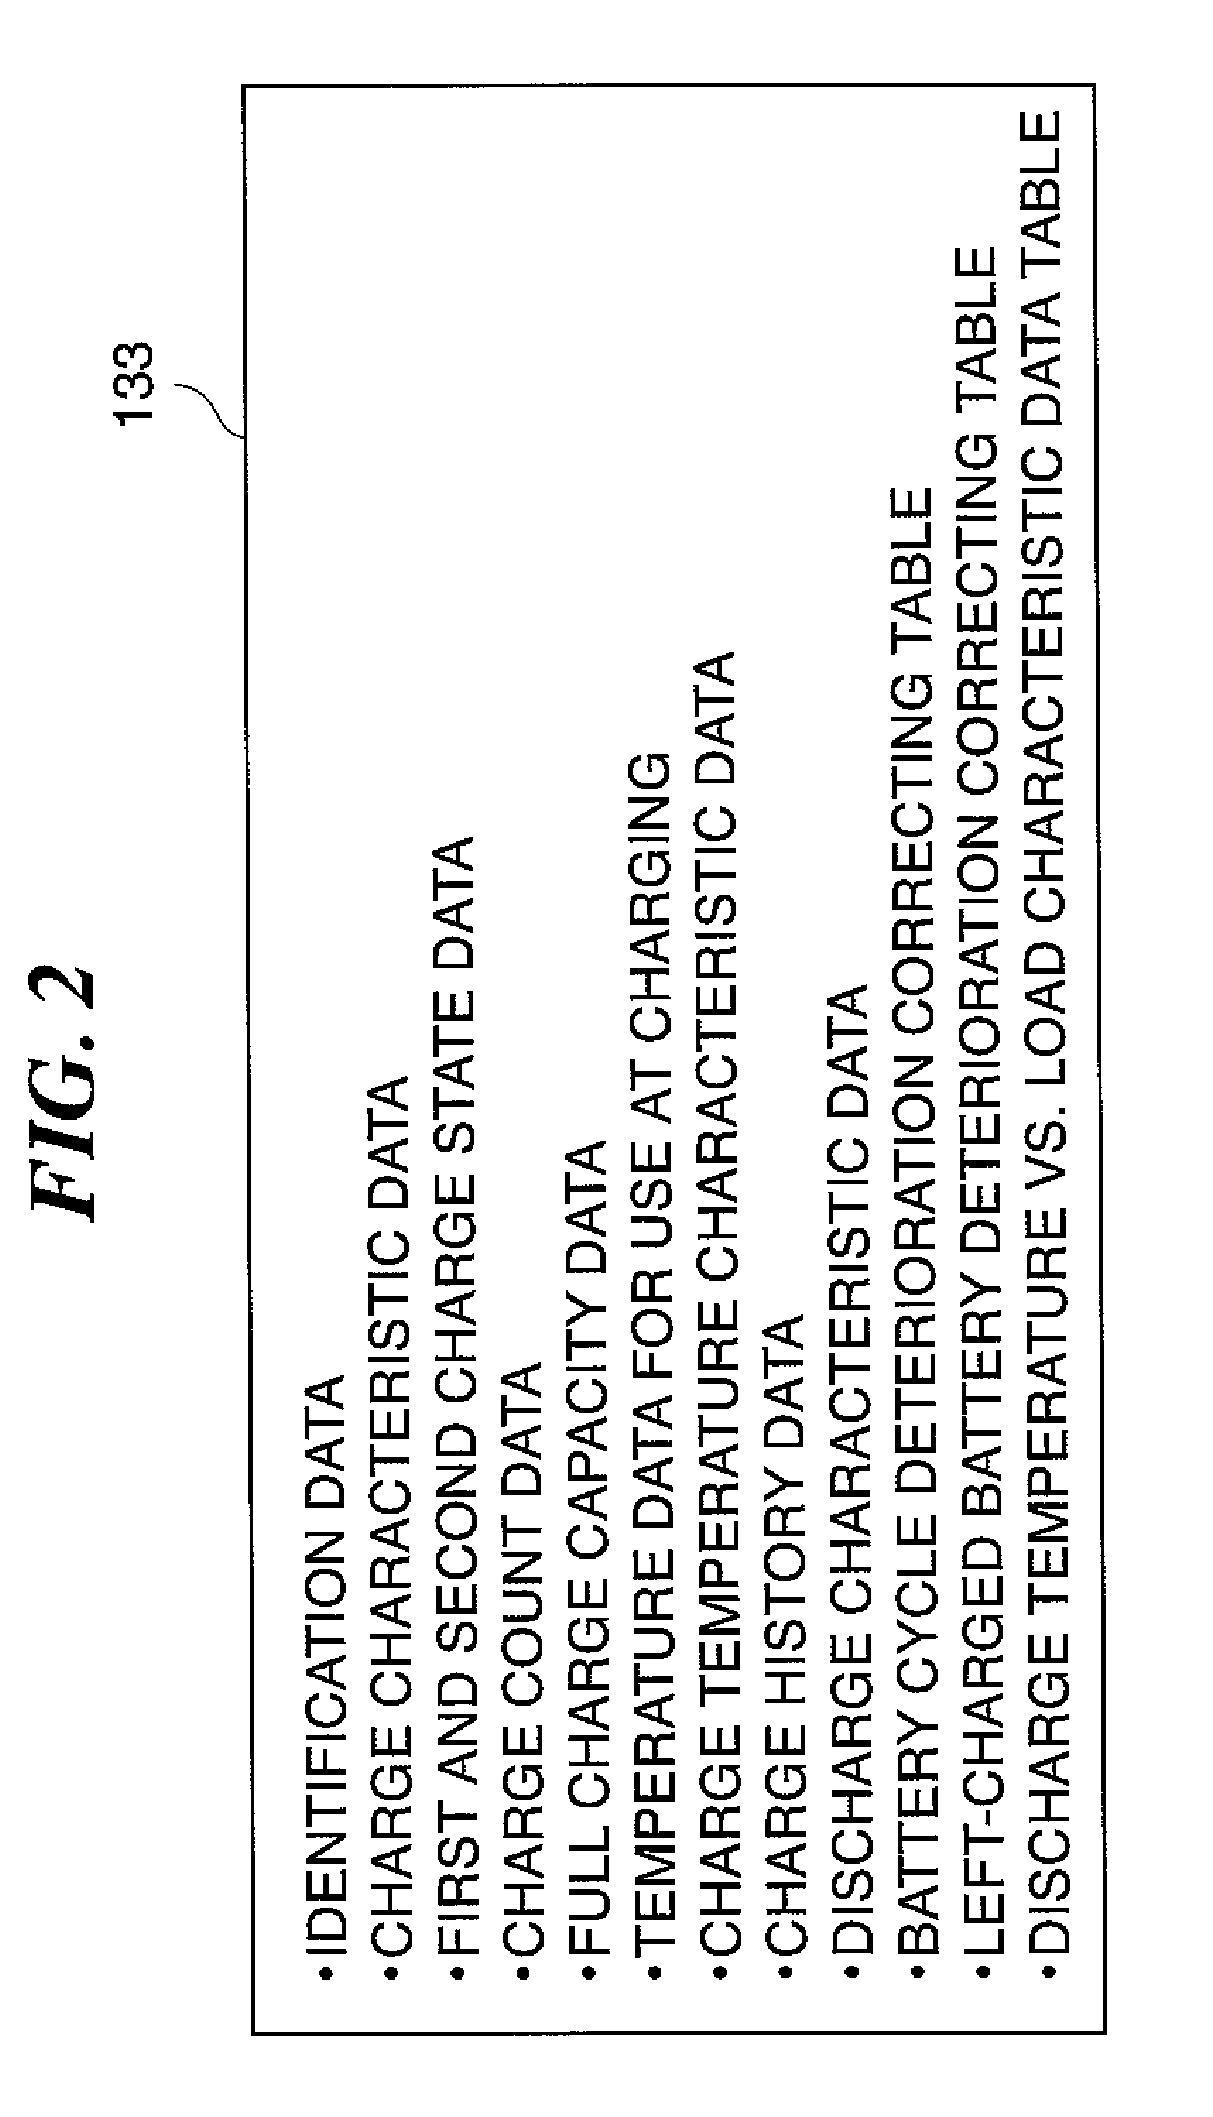 Battery charger and control method therefor